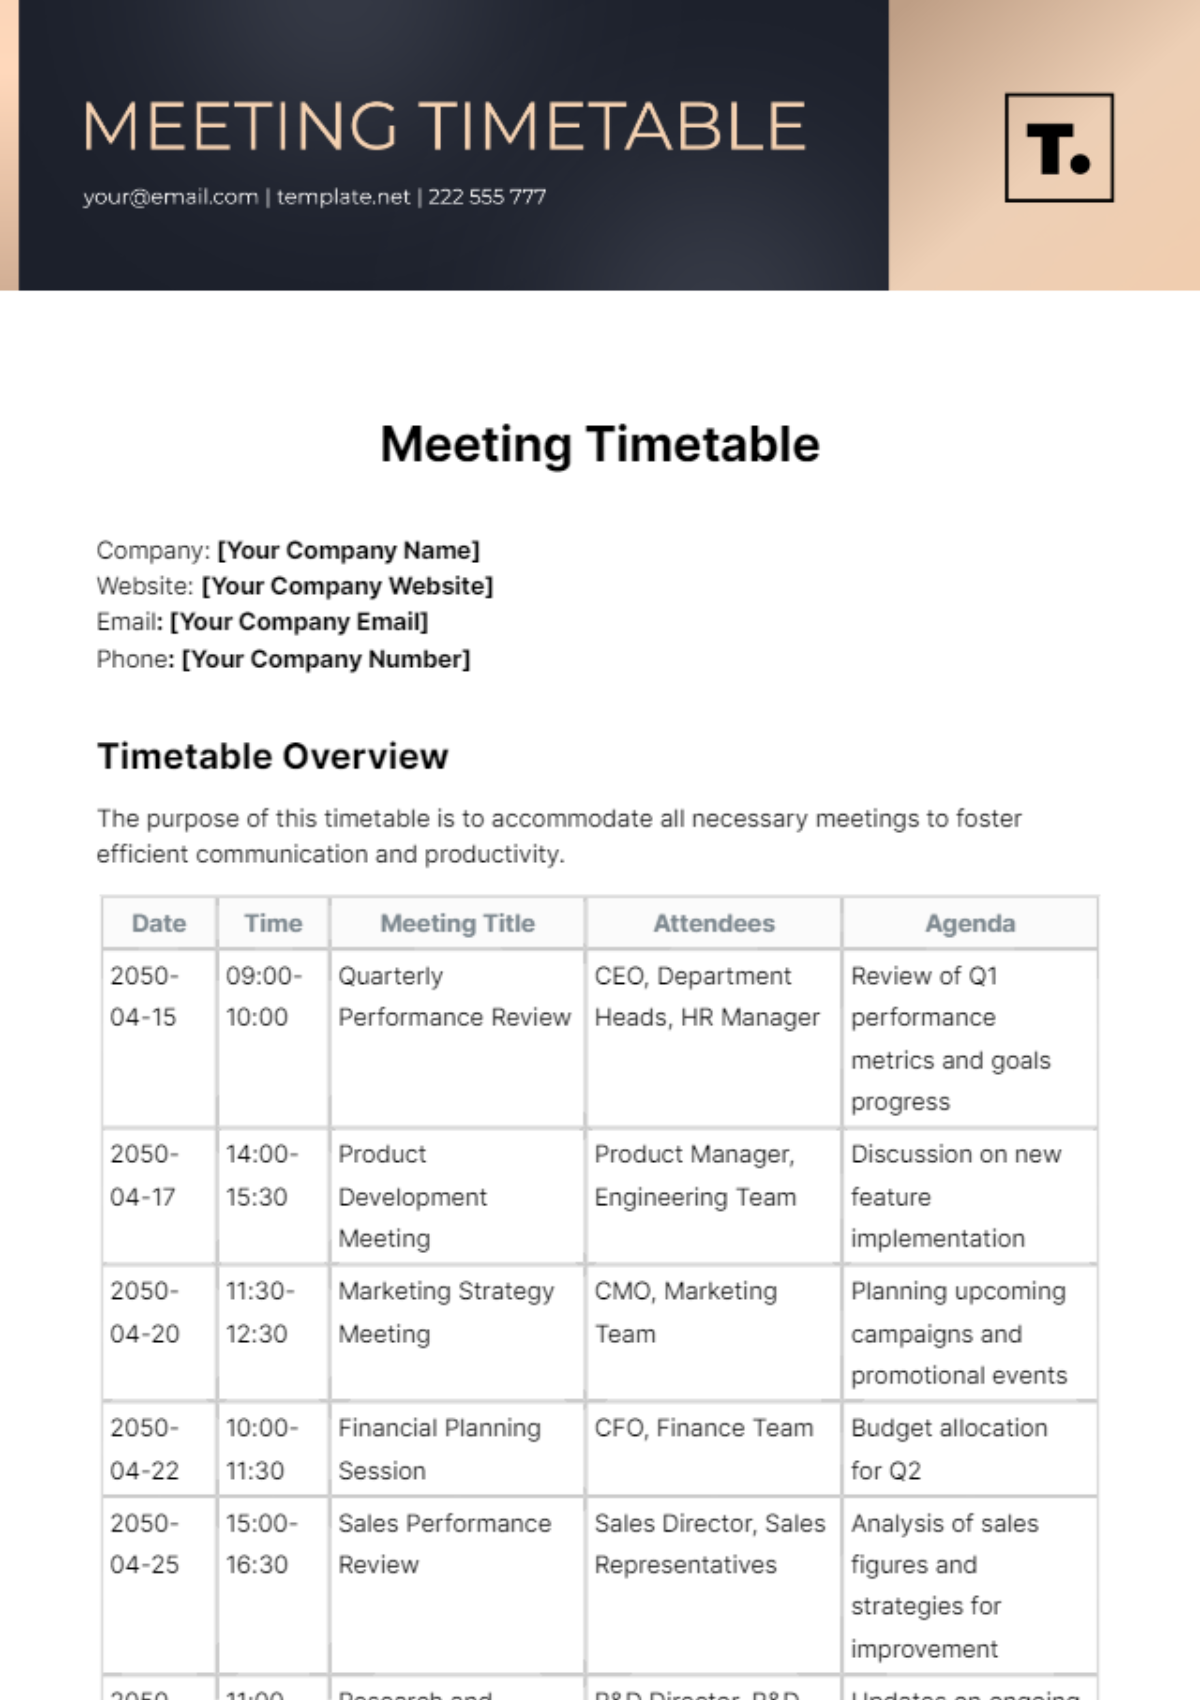 Meeting Timetable Template